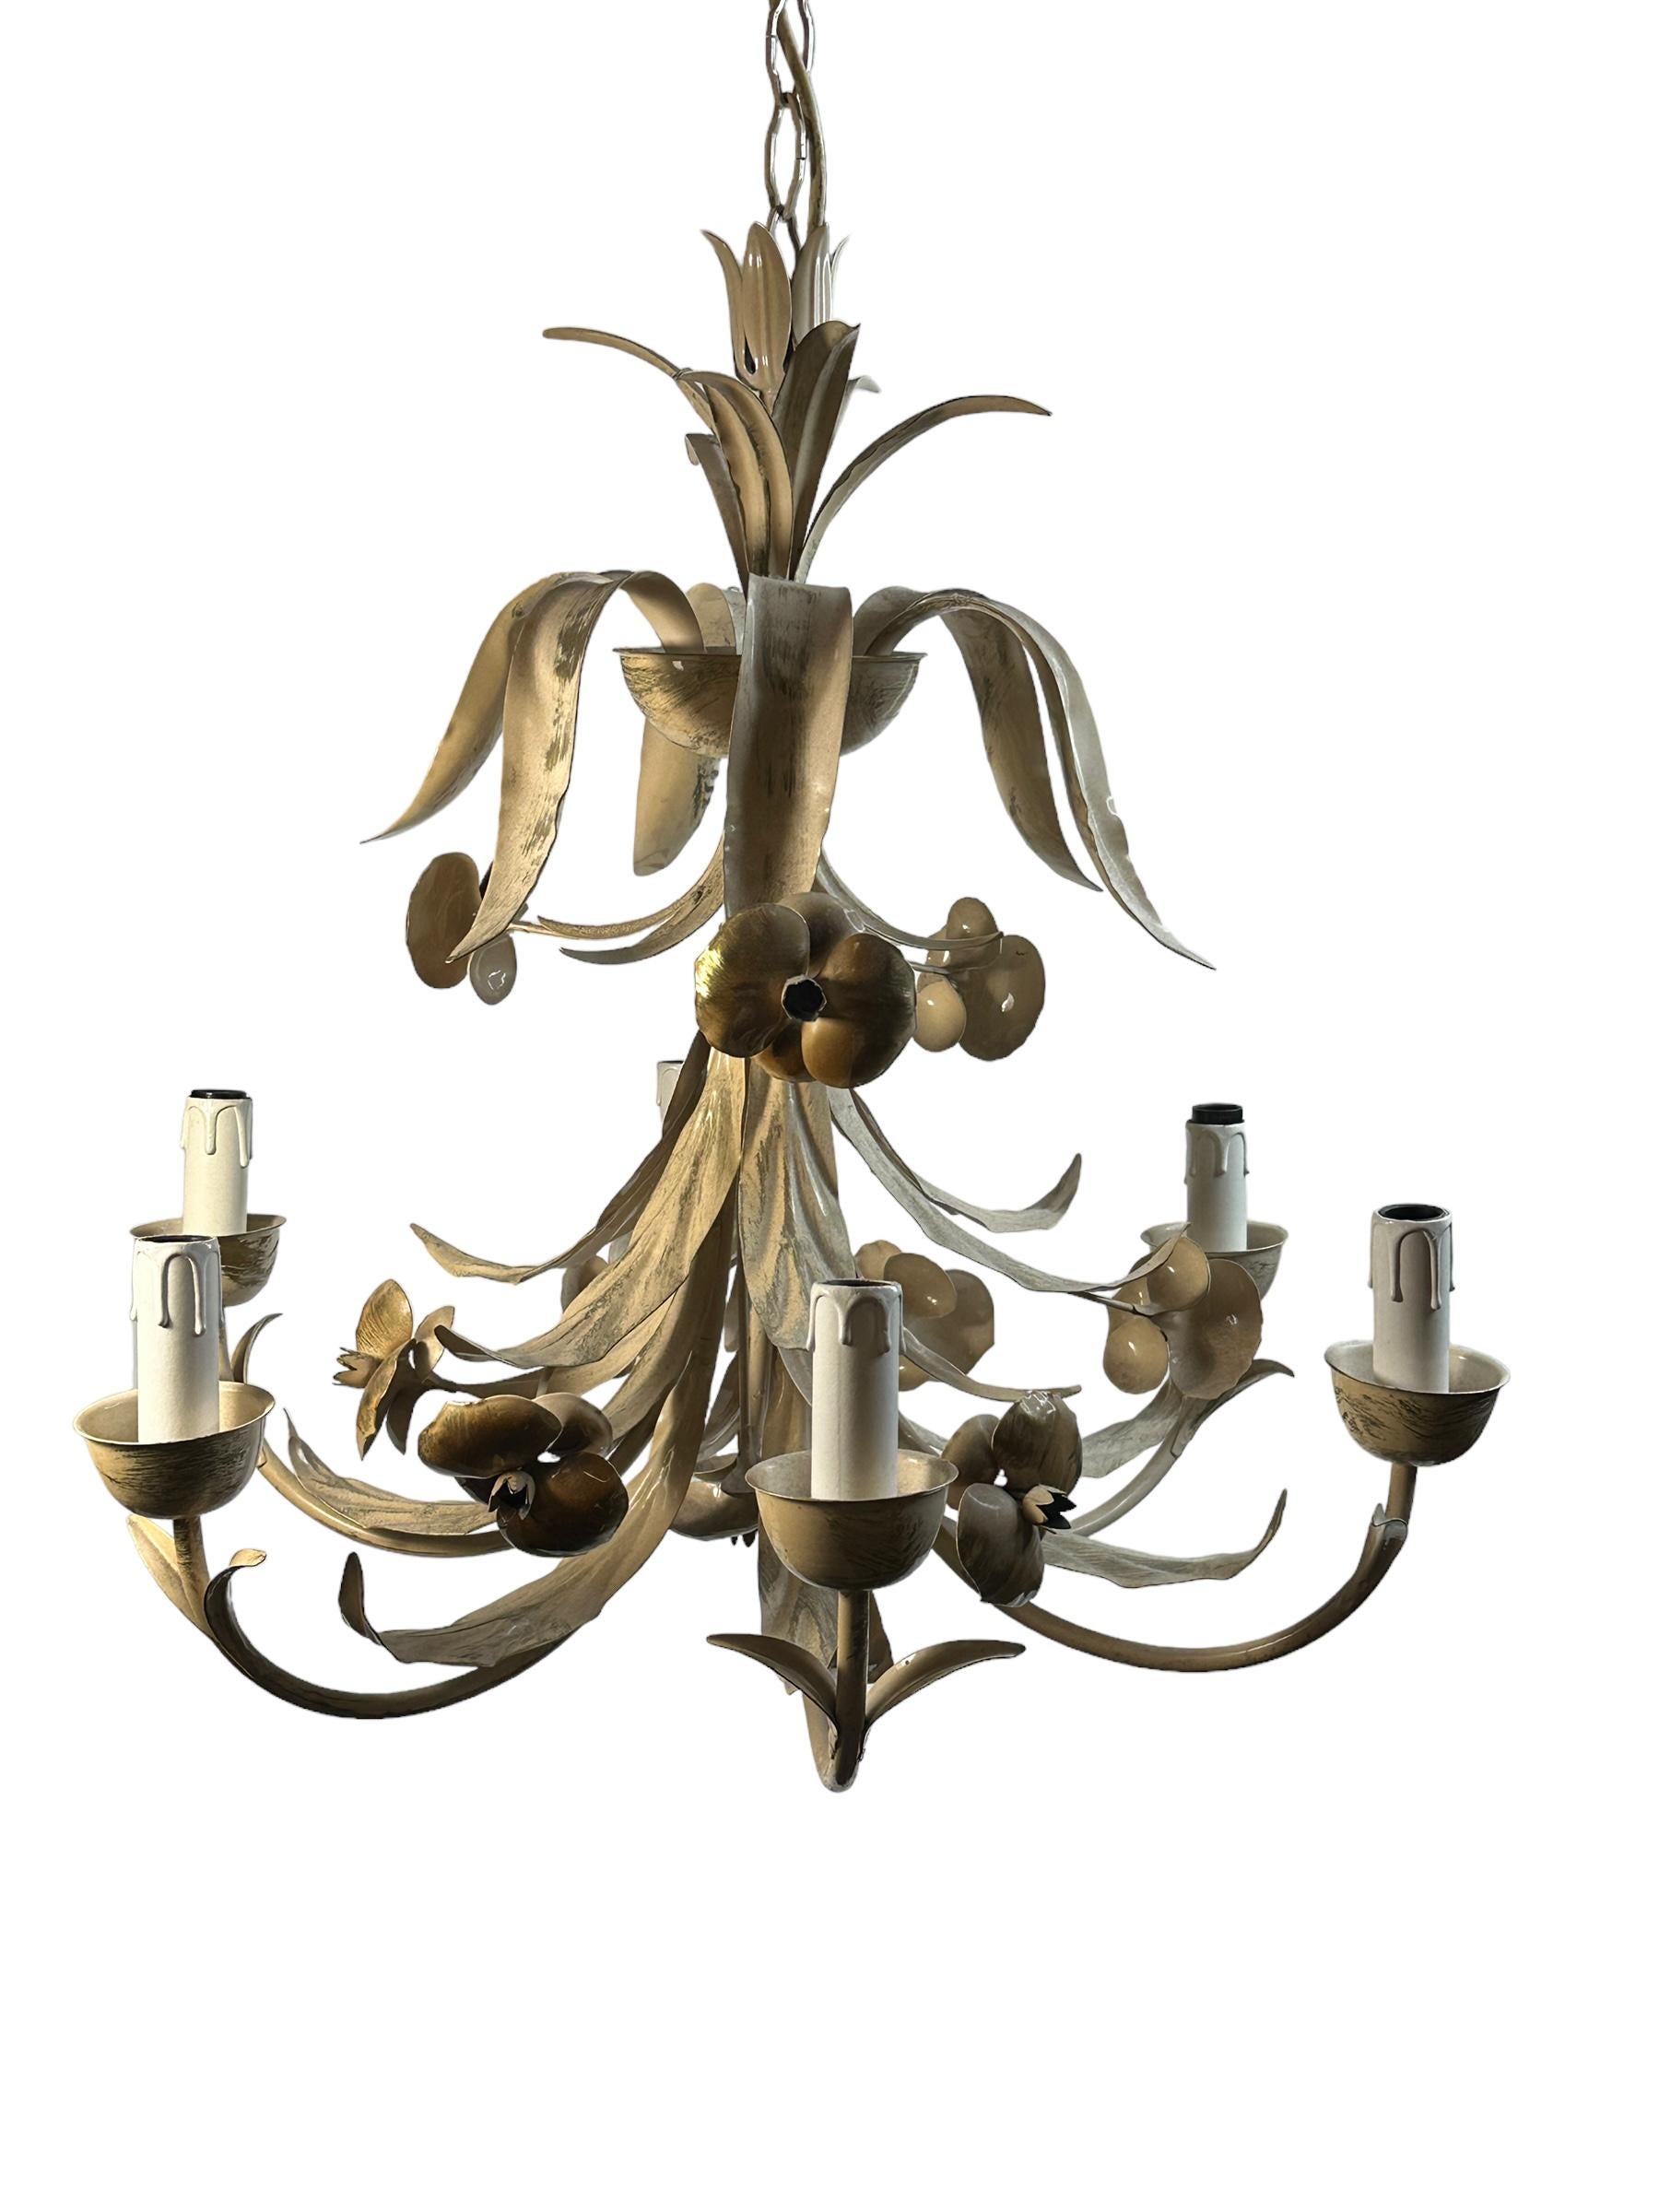 Country Beautiful Cottage Style Shabby Chic Florence Flower Chandelier Eglo Leuchten For Sale